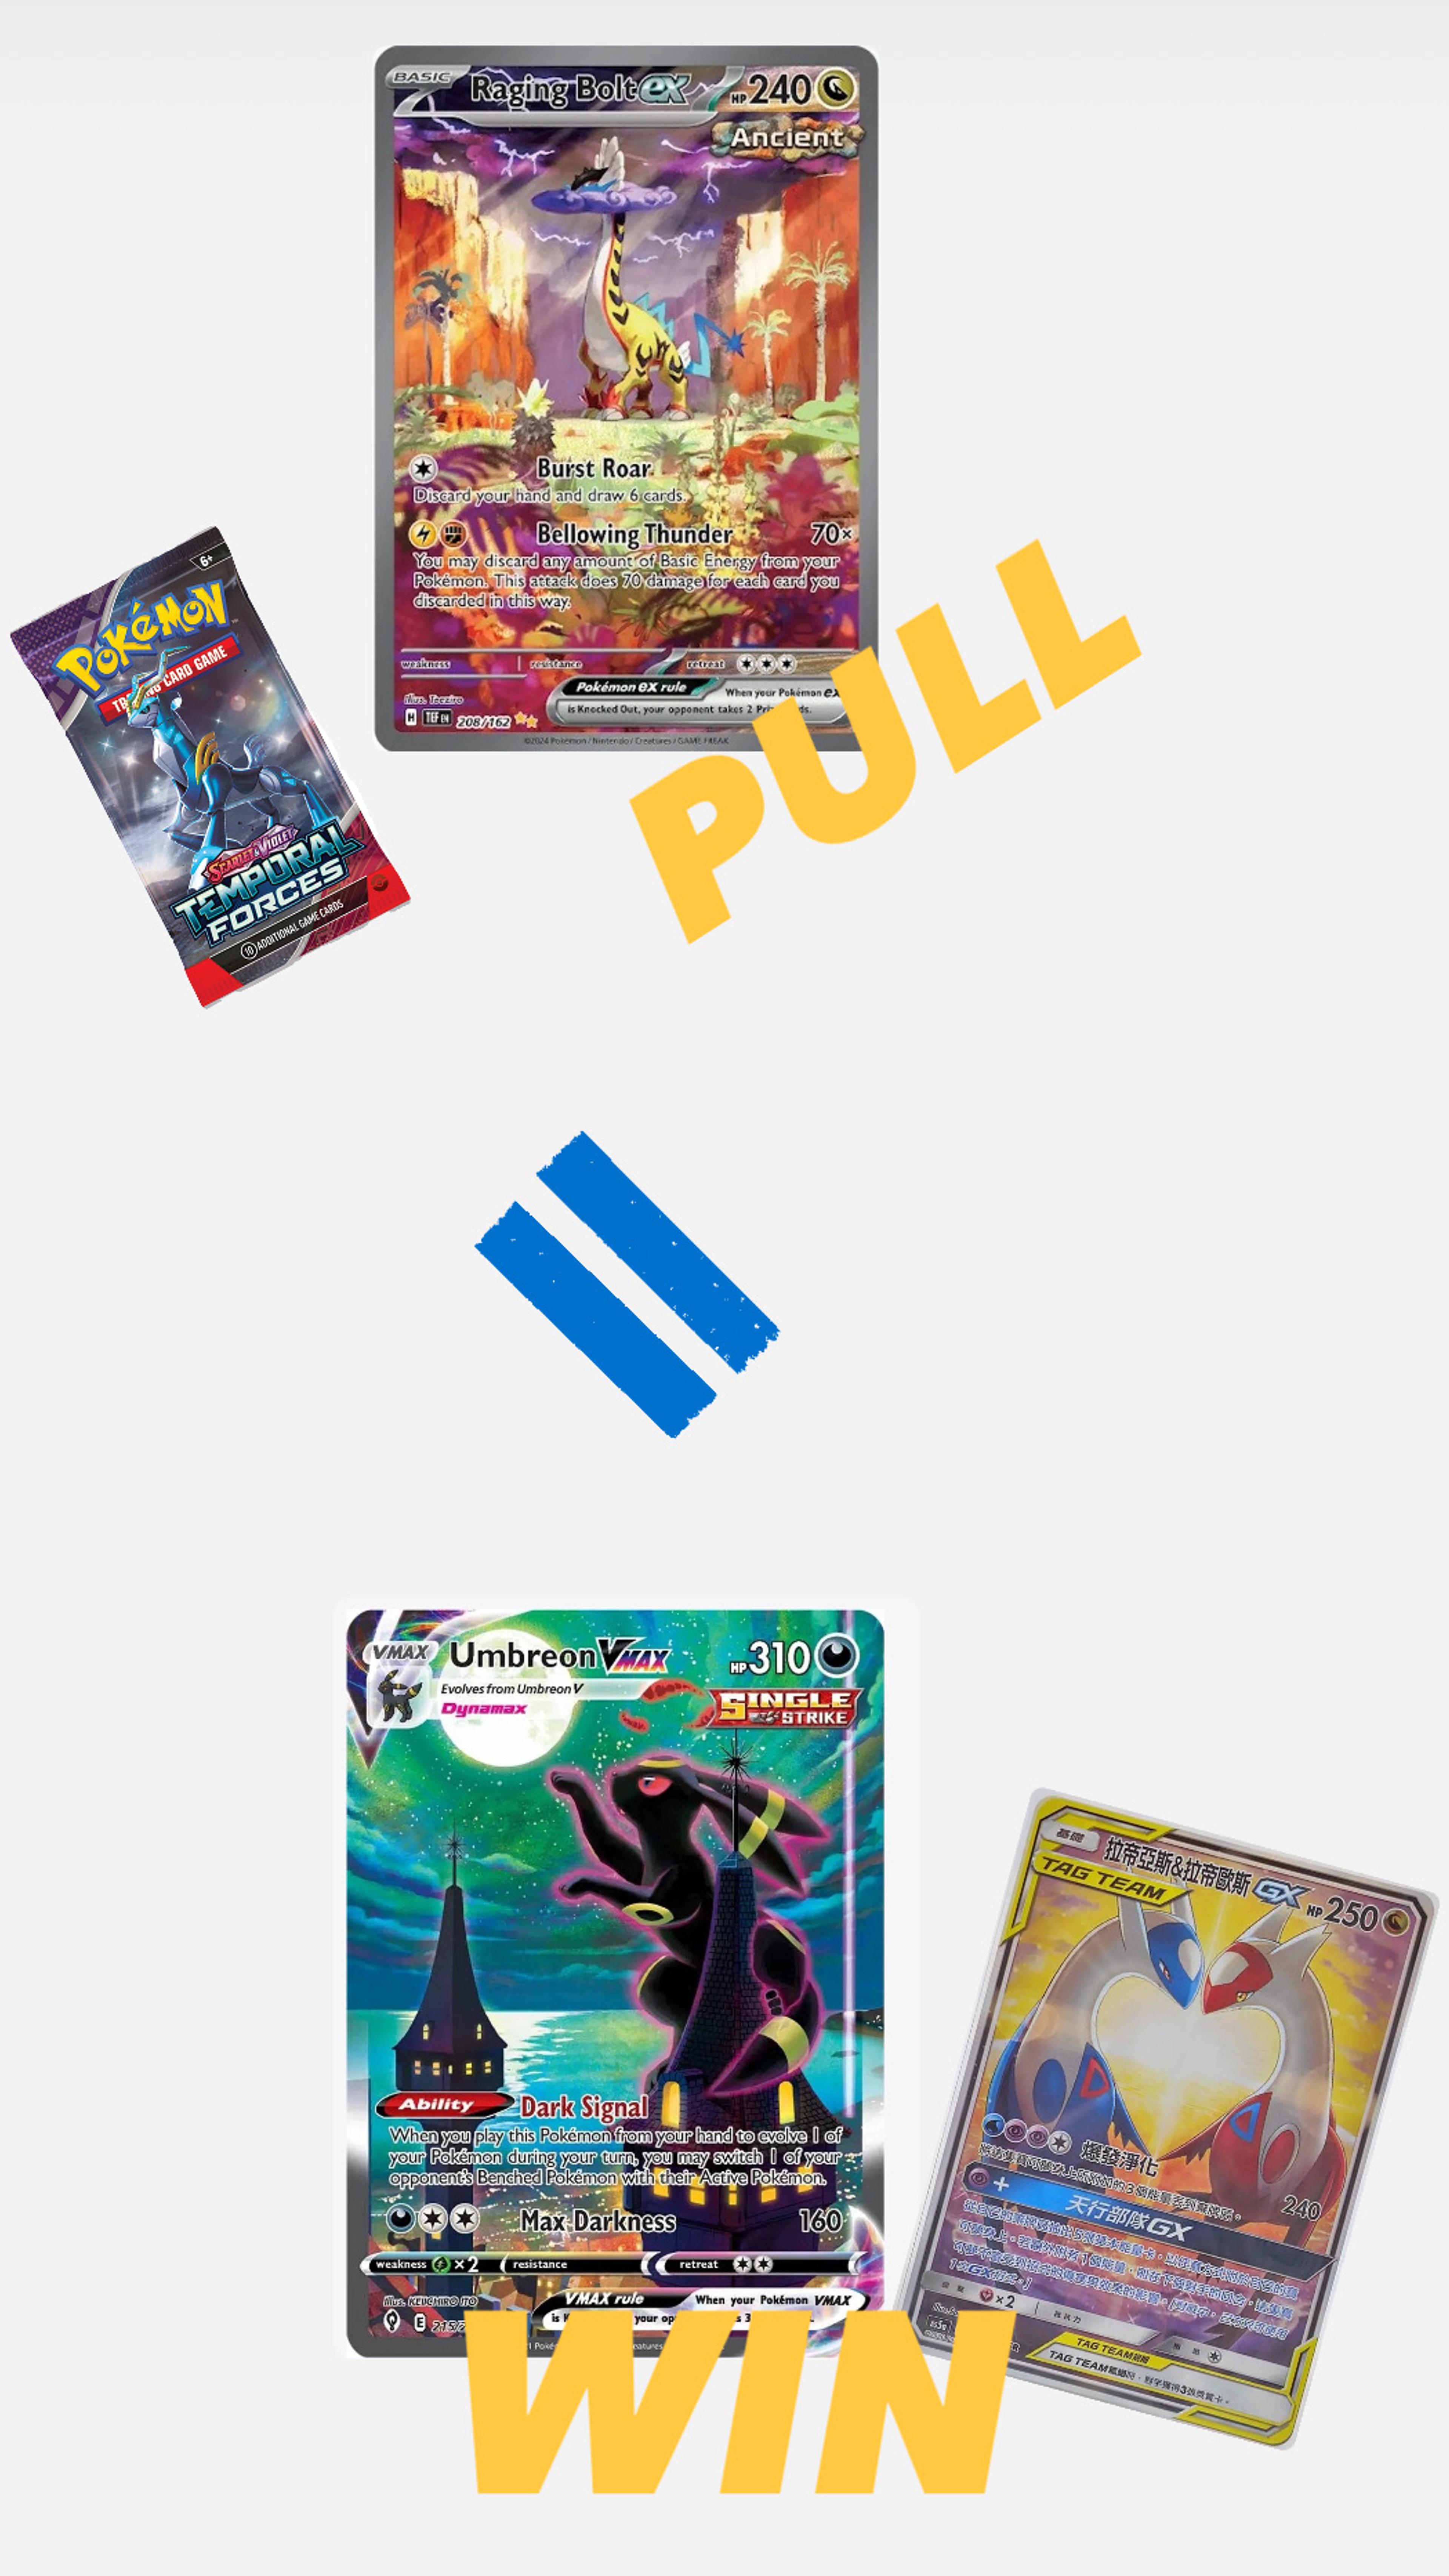 Preview image for the show titled "Craftii: WIN UMBREON VMAX ALT! TCG & MORE!" at Today @ 3:35 AM